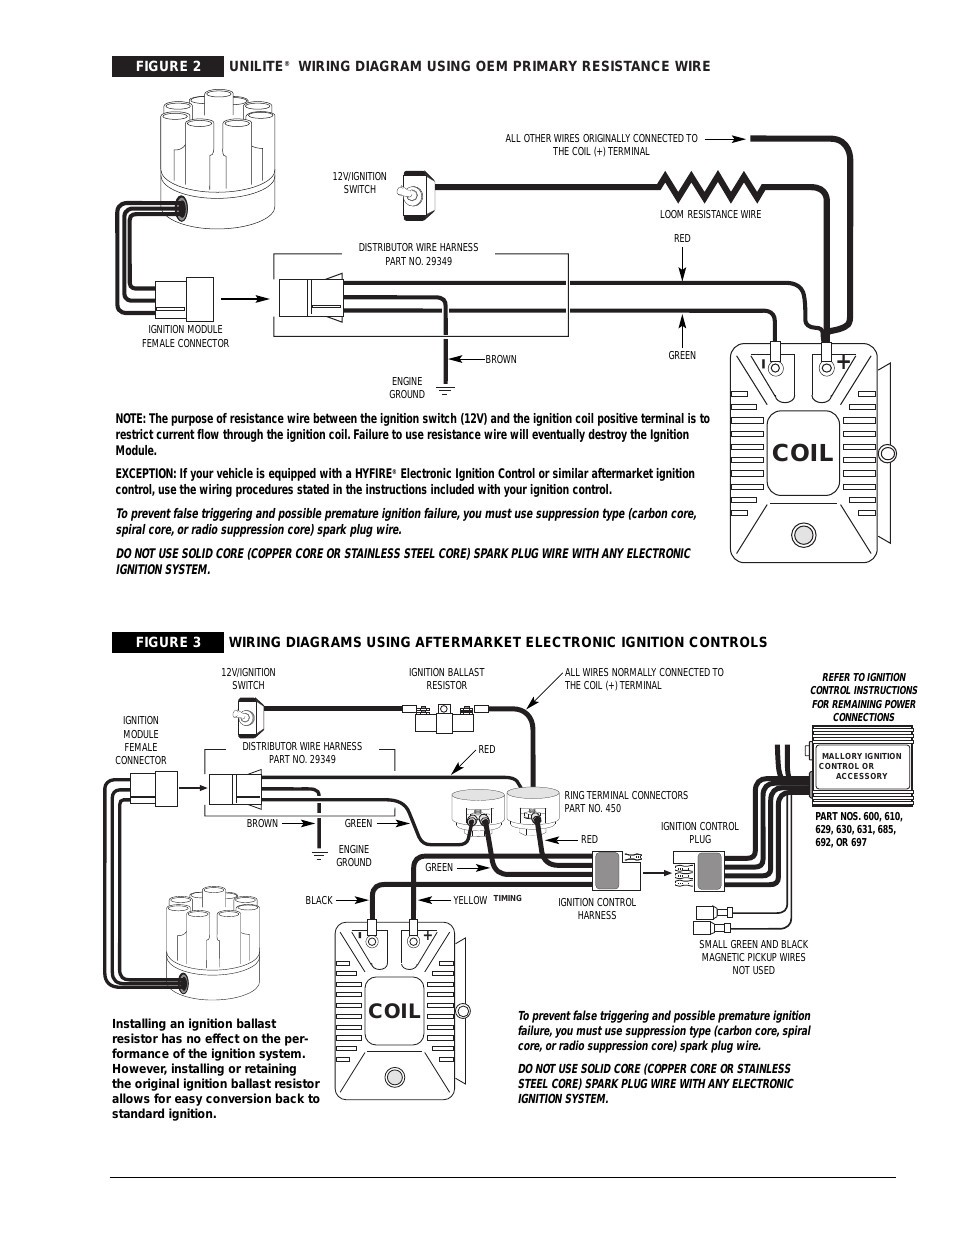 Mallory Coil Wiring Diagram Coil for Mallory Ignition Wiring Diagram In Wiring Diagram Amazing and